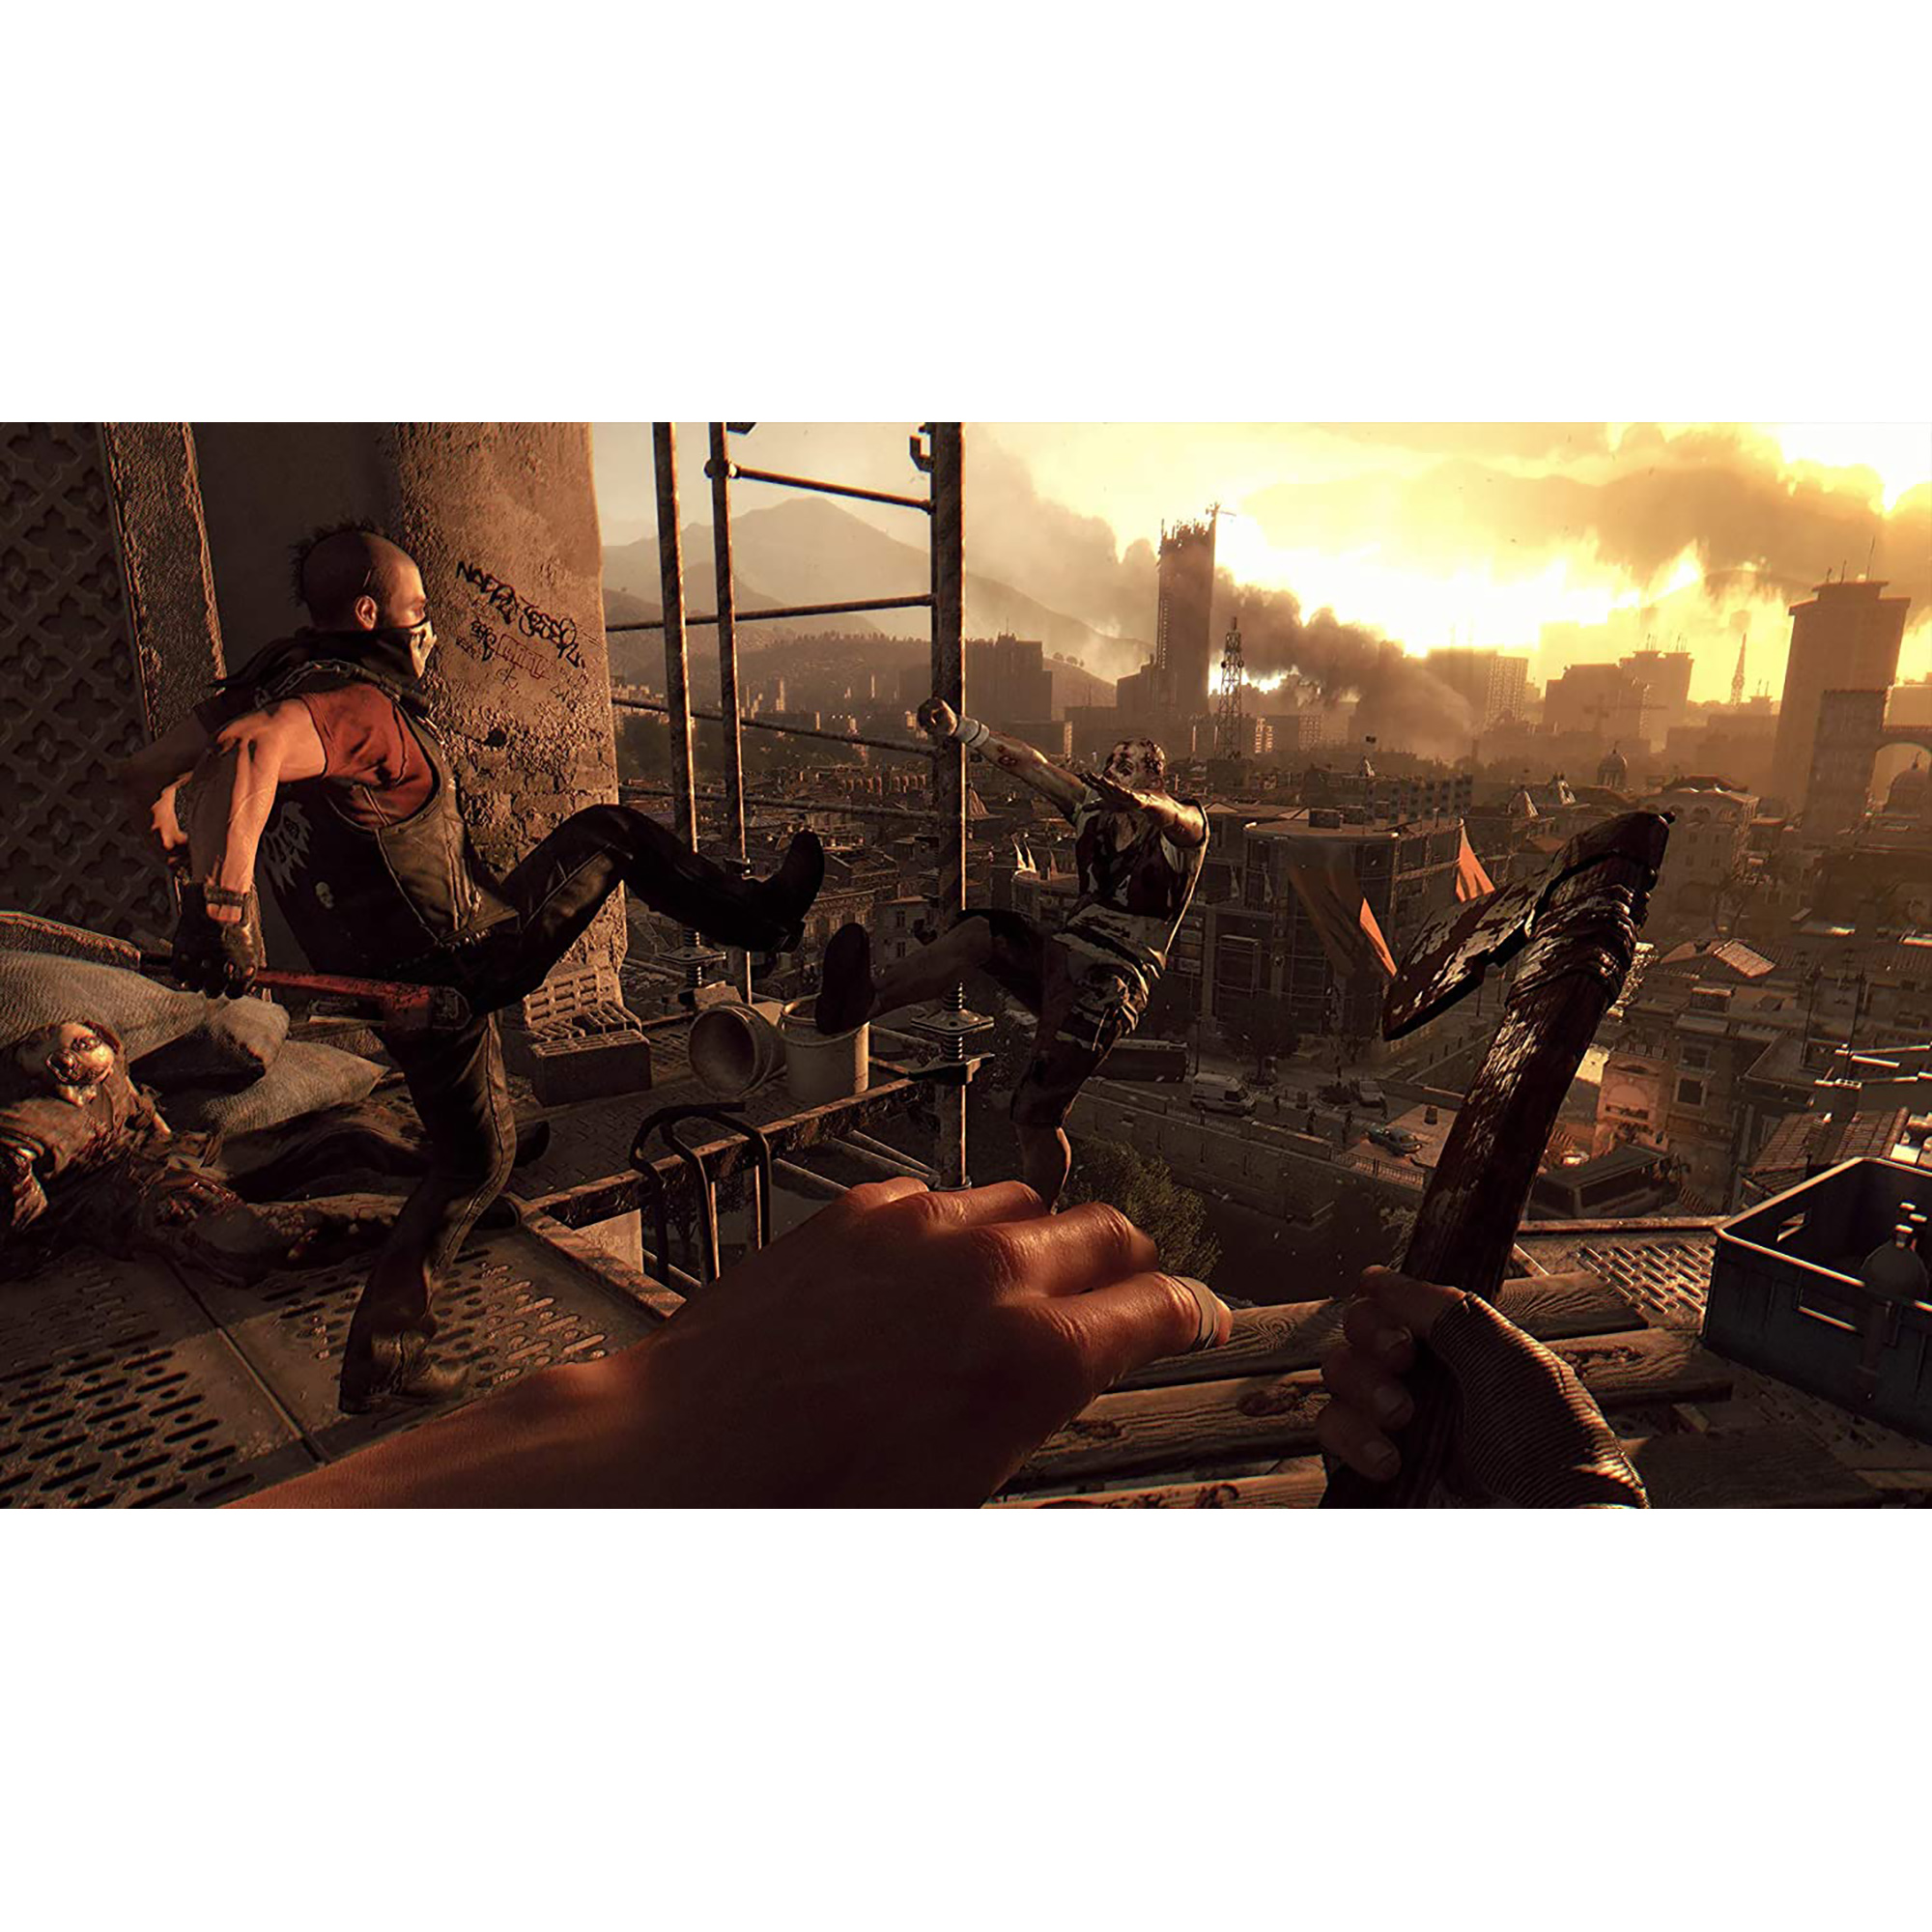 Dying Light Anniversary Edition, Square Enix, PlayStation 4 